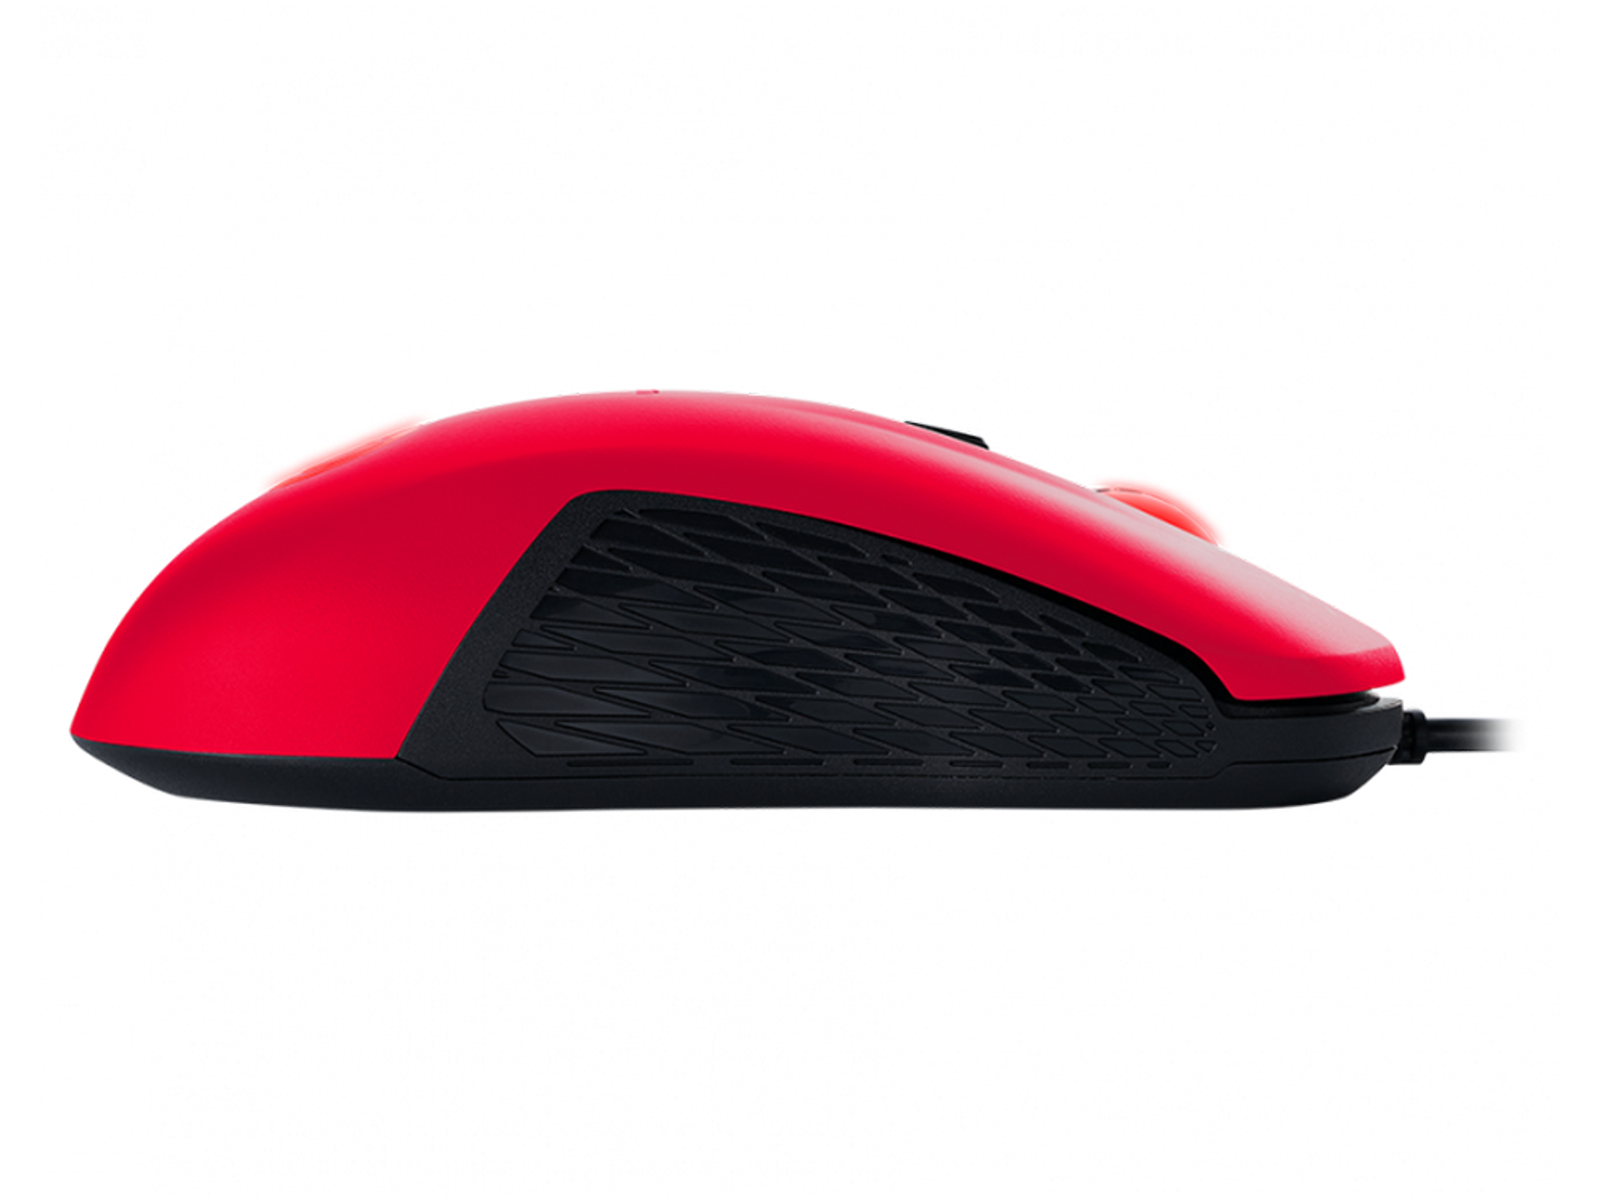 NACON NA374445 GM-110 Rot MOUSE GAMING Maus, RED PC